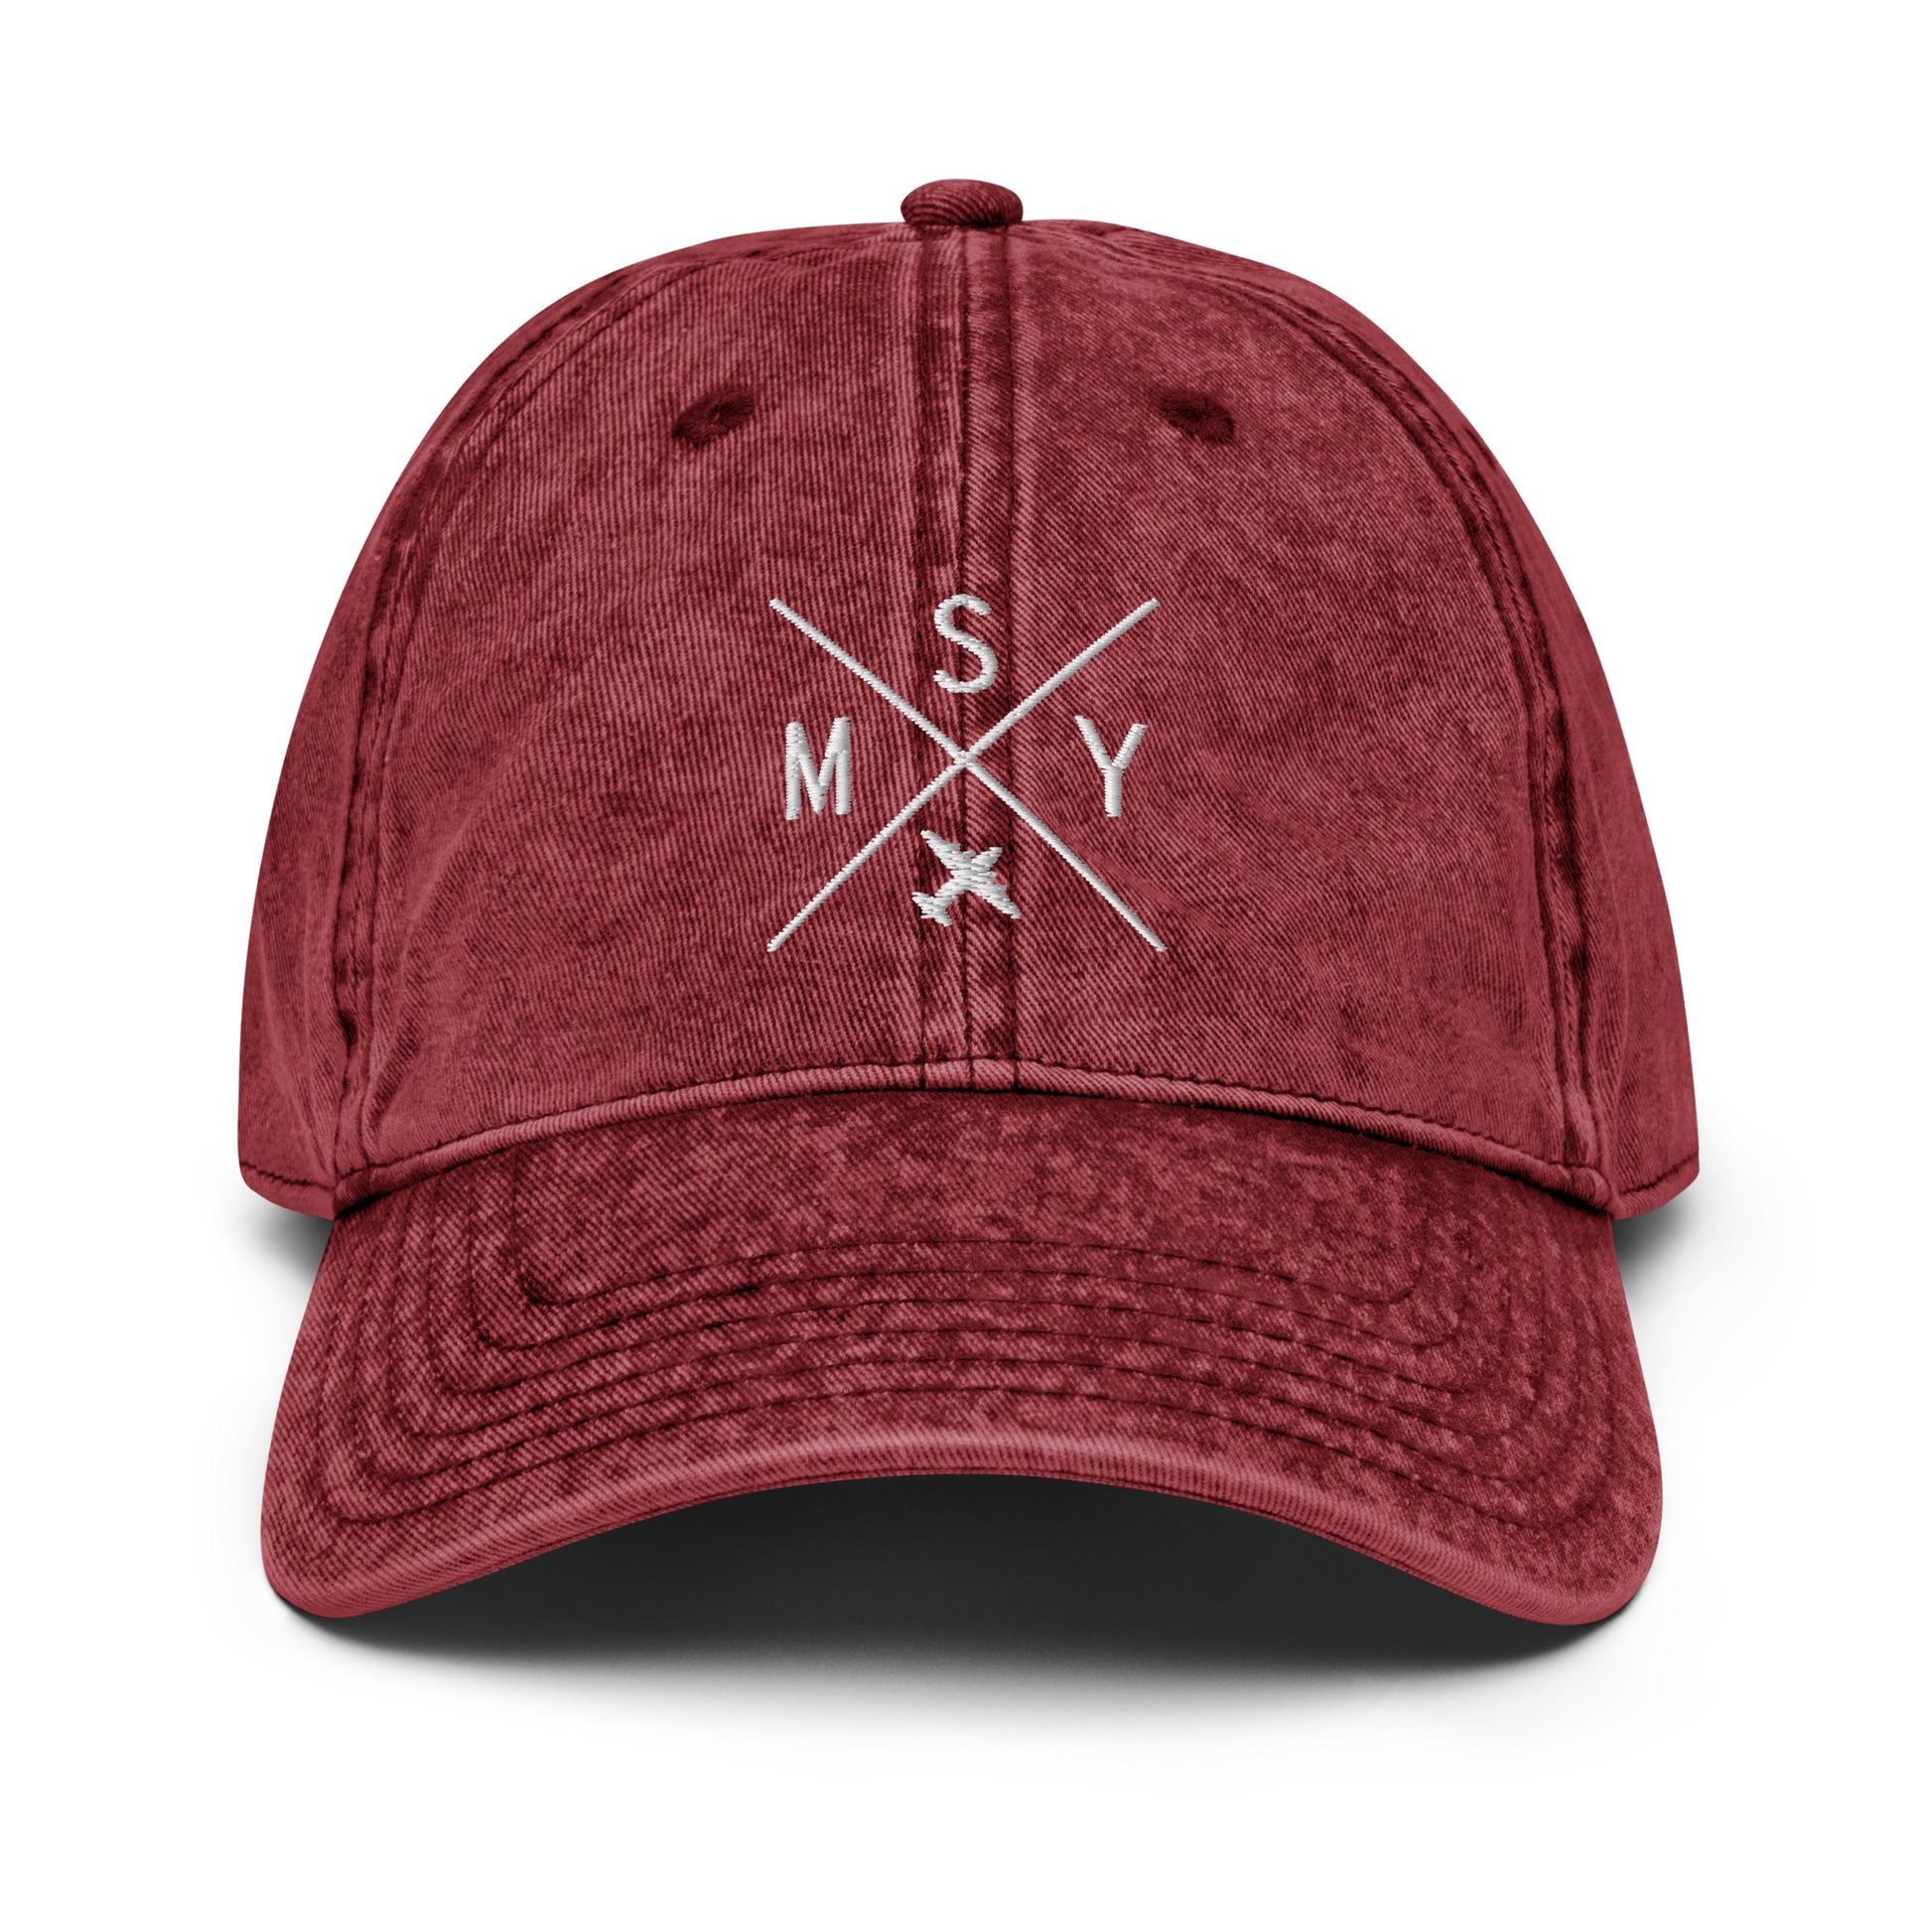 Crossed-X Cotton Twill Cap - White • MSY New Orleans • YHM Designs - Image 22